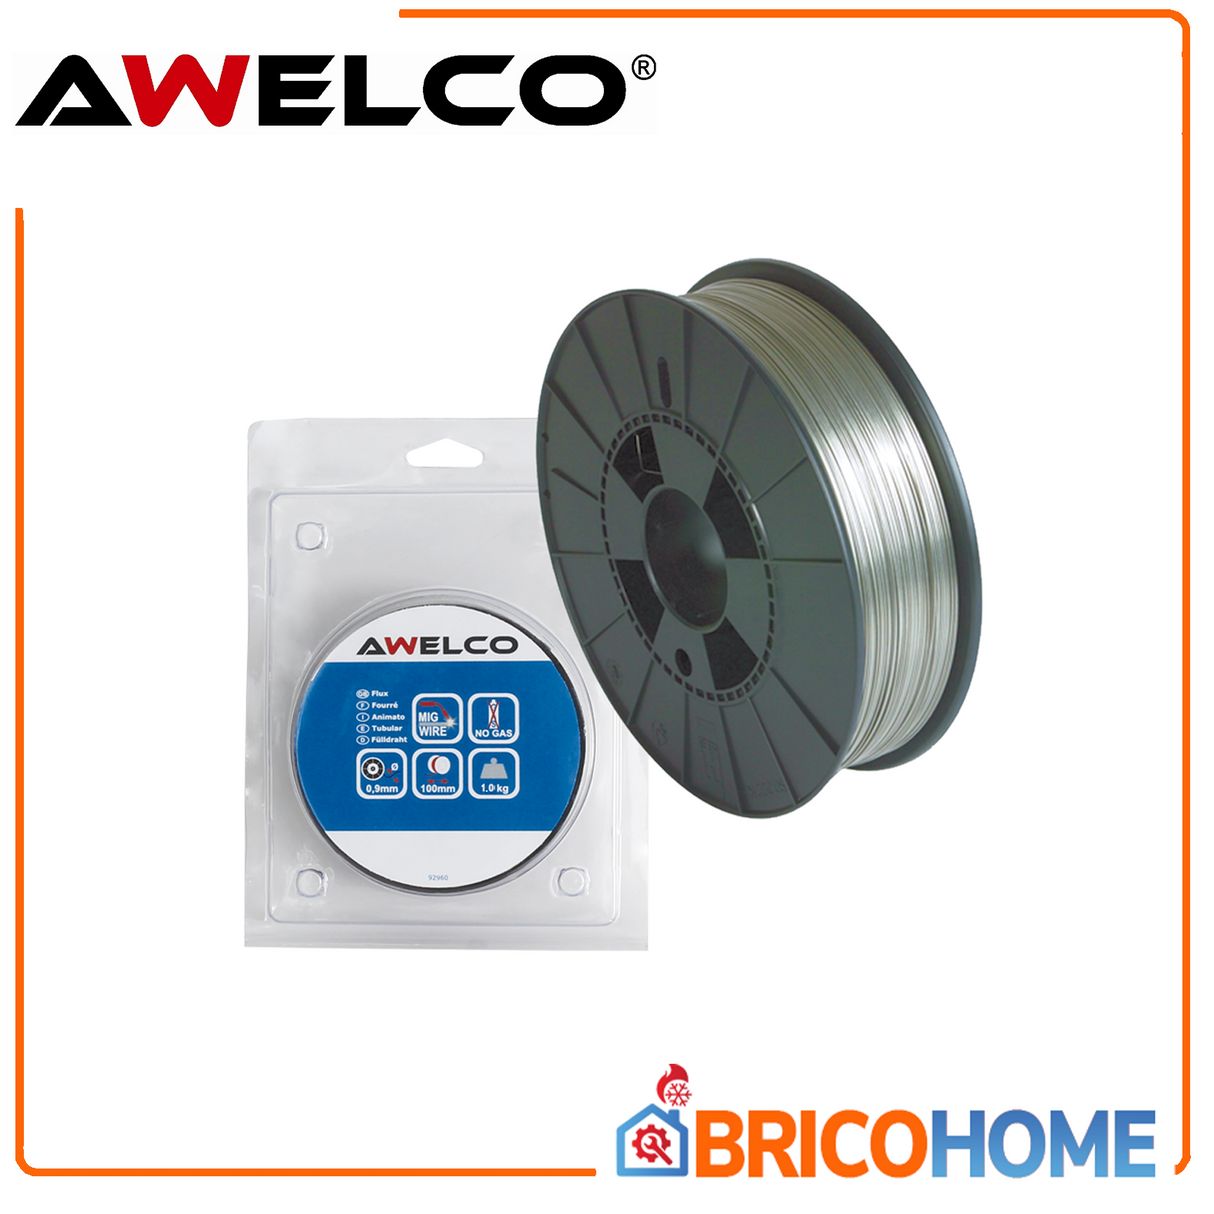 CORED WIRE COIL FOR NO GAS WELDING MACHINE Ø 0,9 MM. FROM 1.0 KG AWELCO